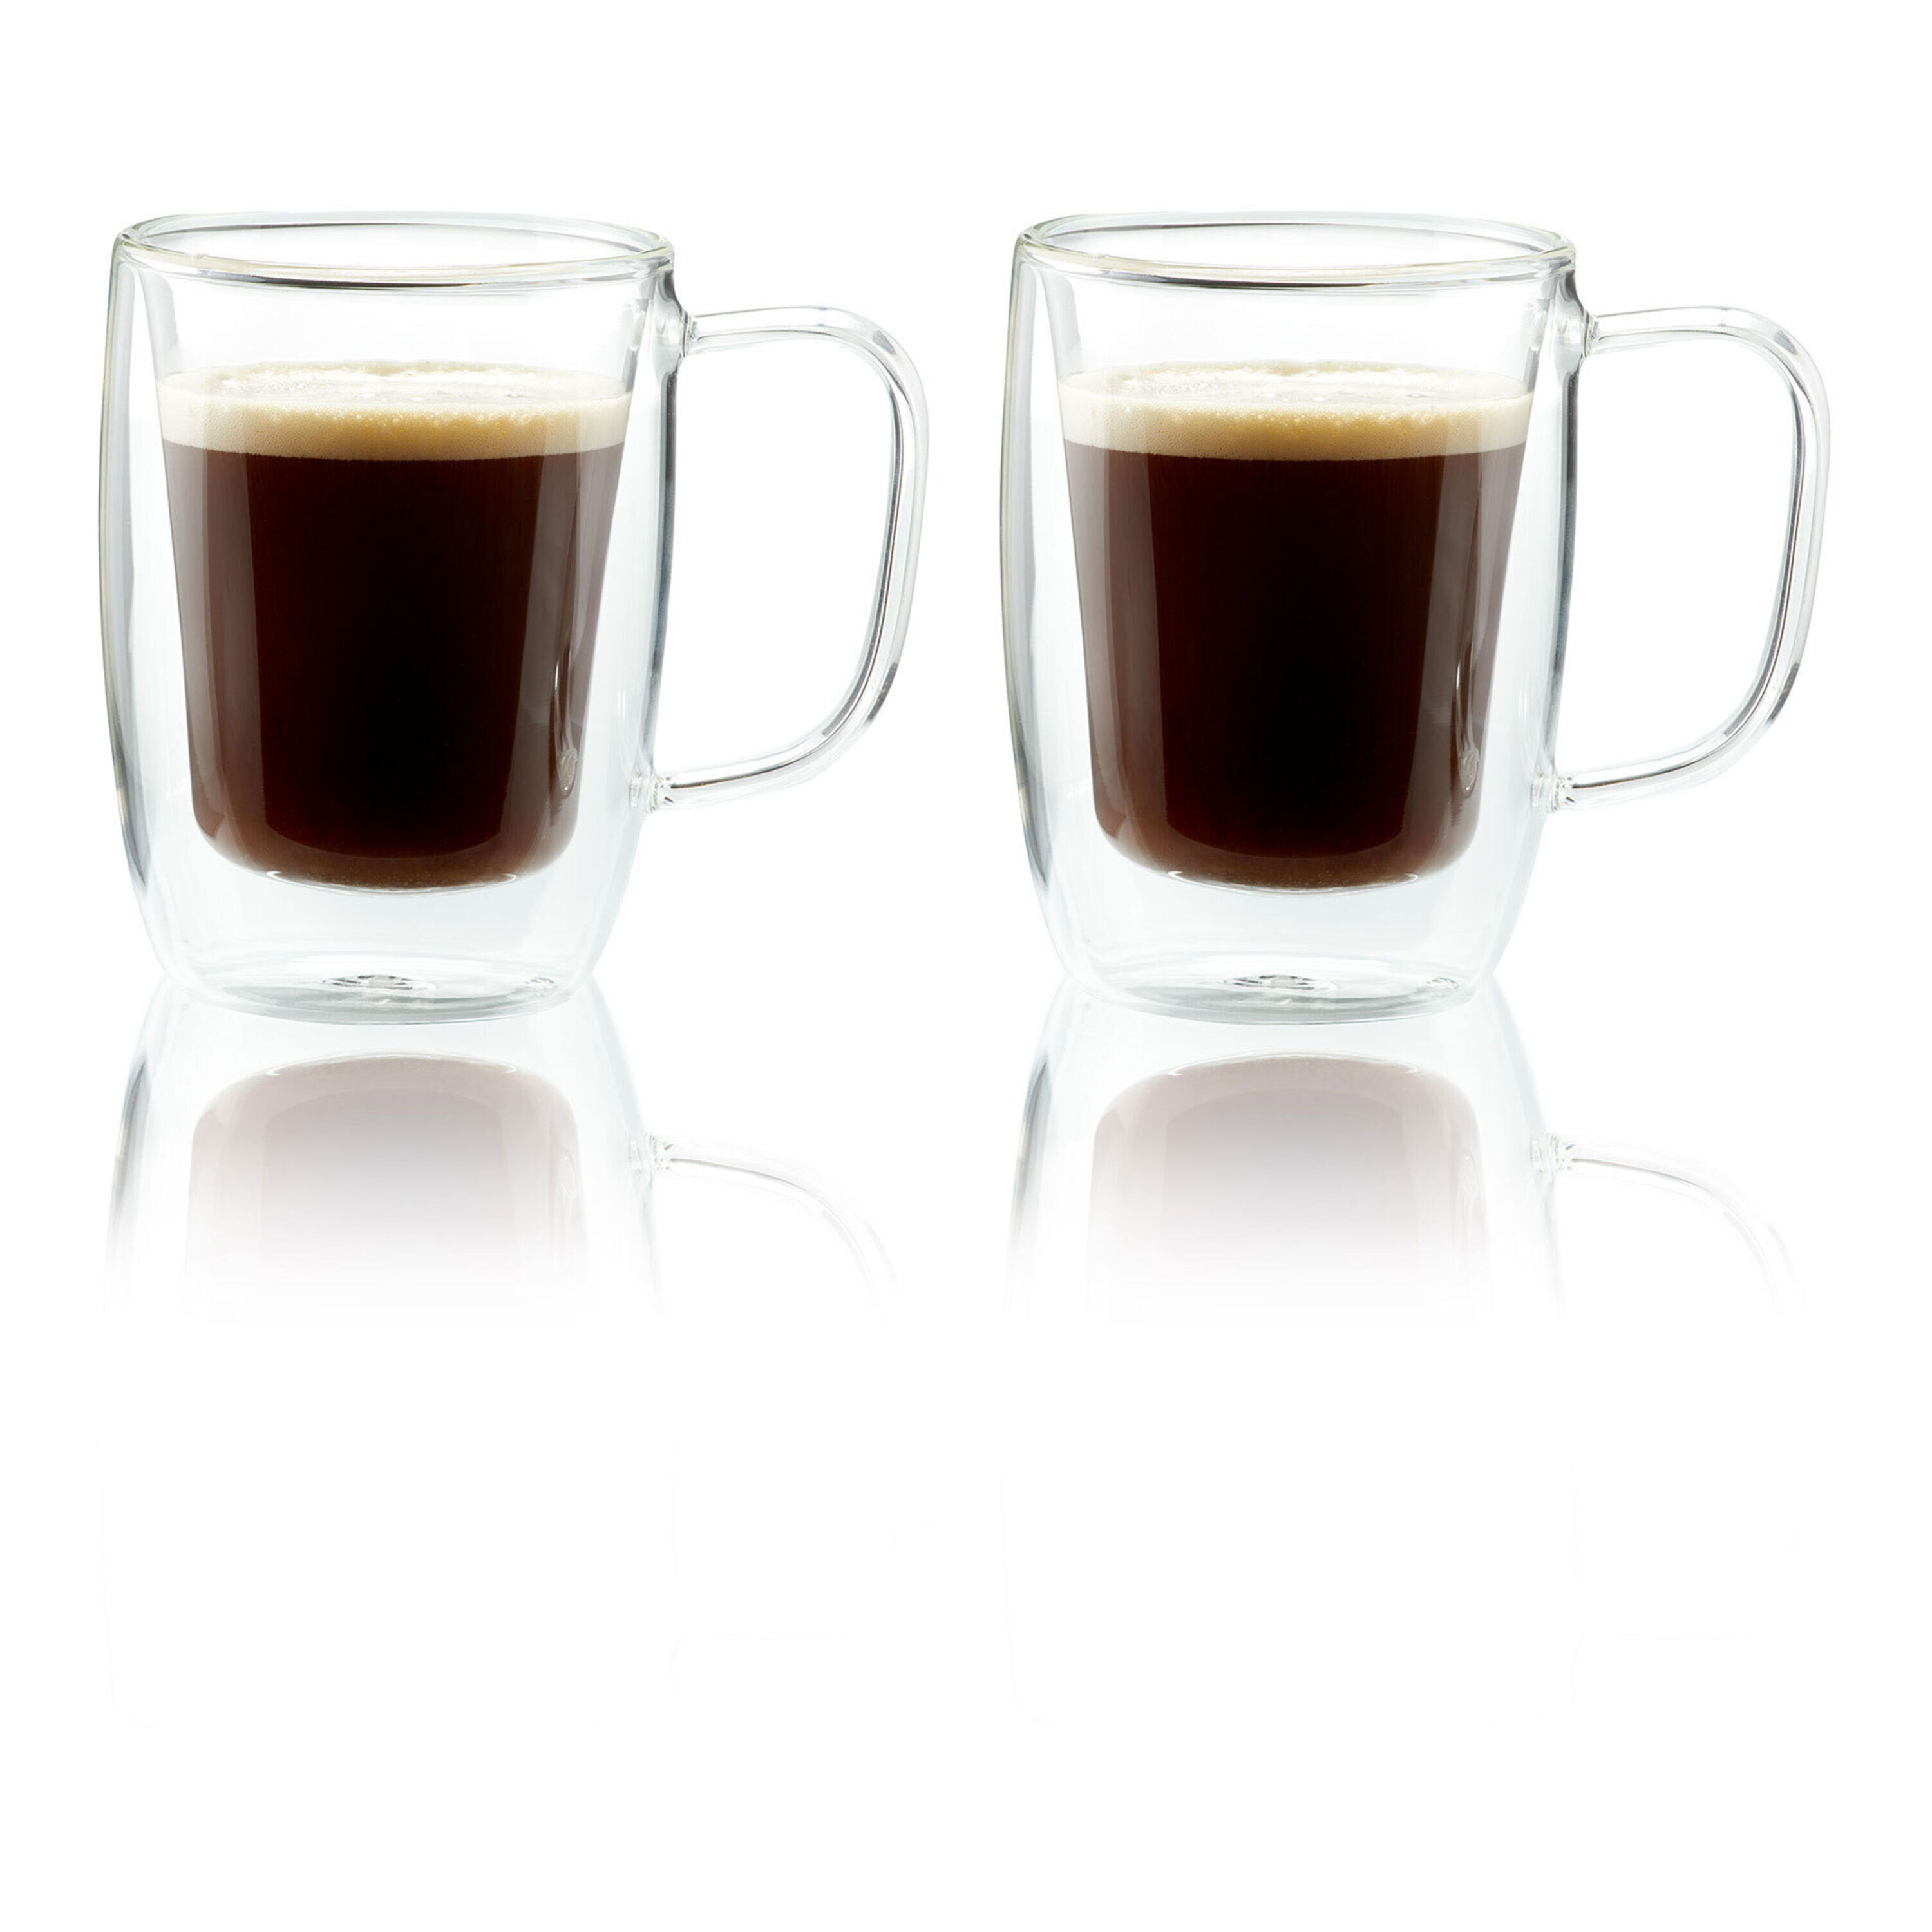 Kaffe 16oz Large Glass Coffee Cups - Double-Wall Clear Coffee Mug Set -  Insulated Glass Cups for Latte, Espresso, Cappuccino, Tea (Set of 2)